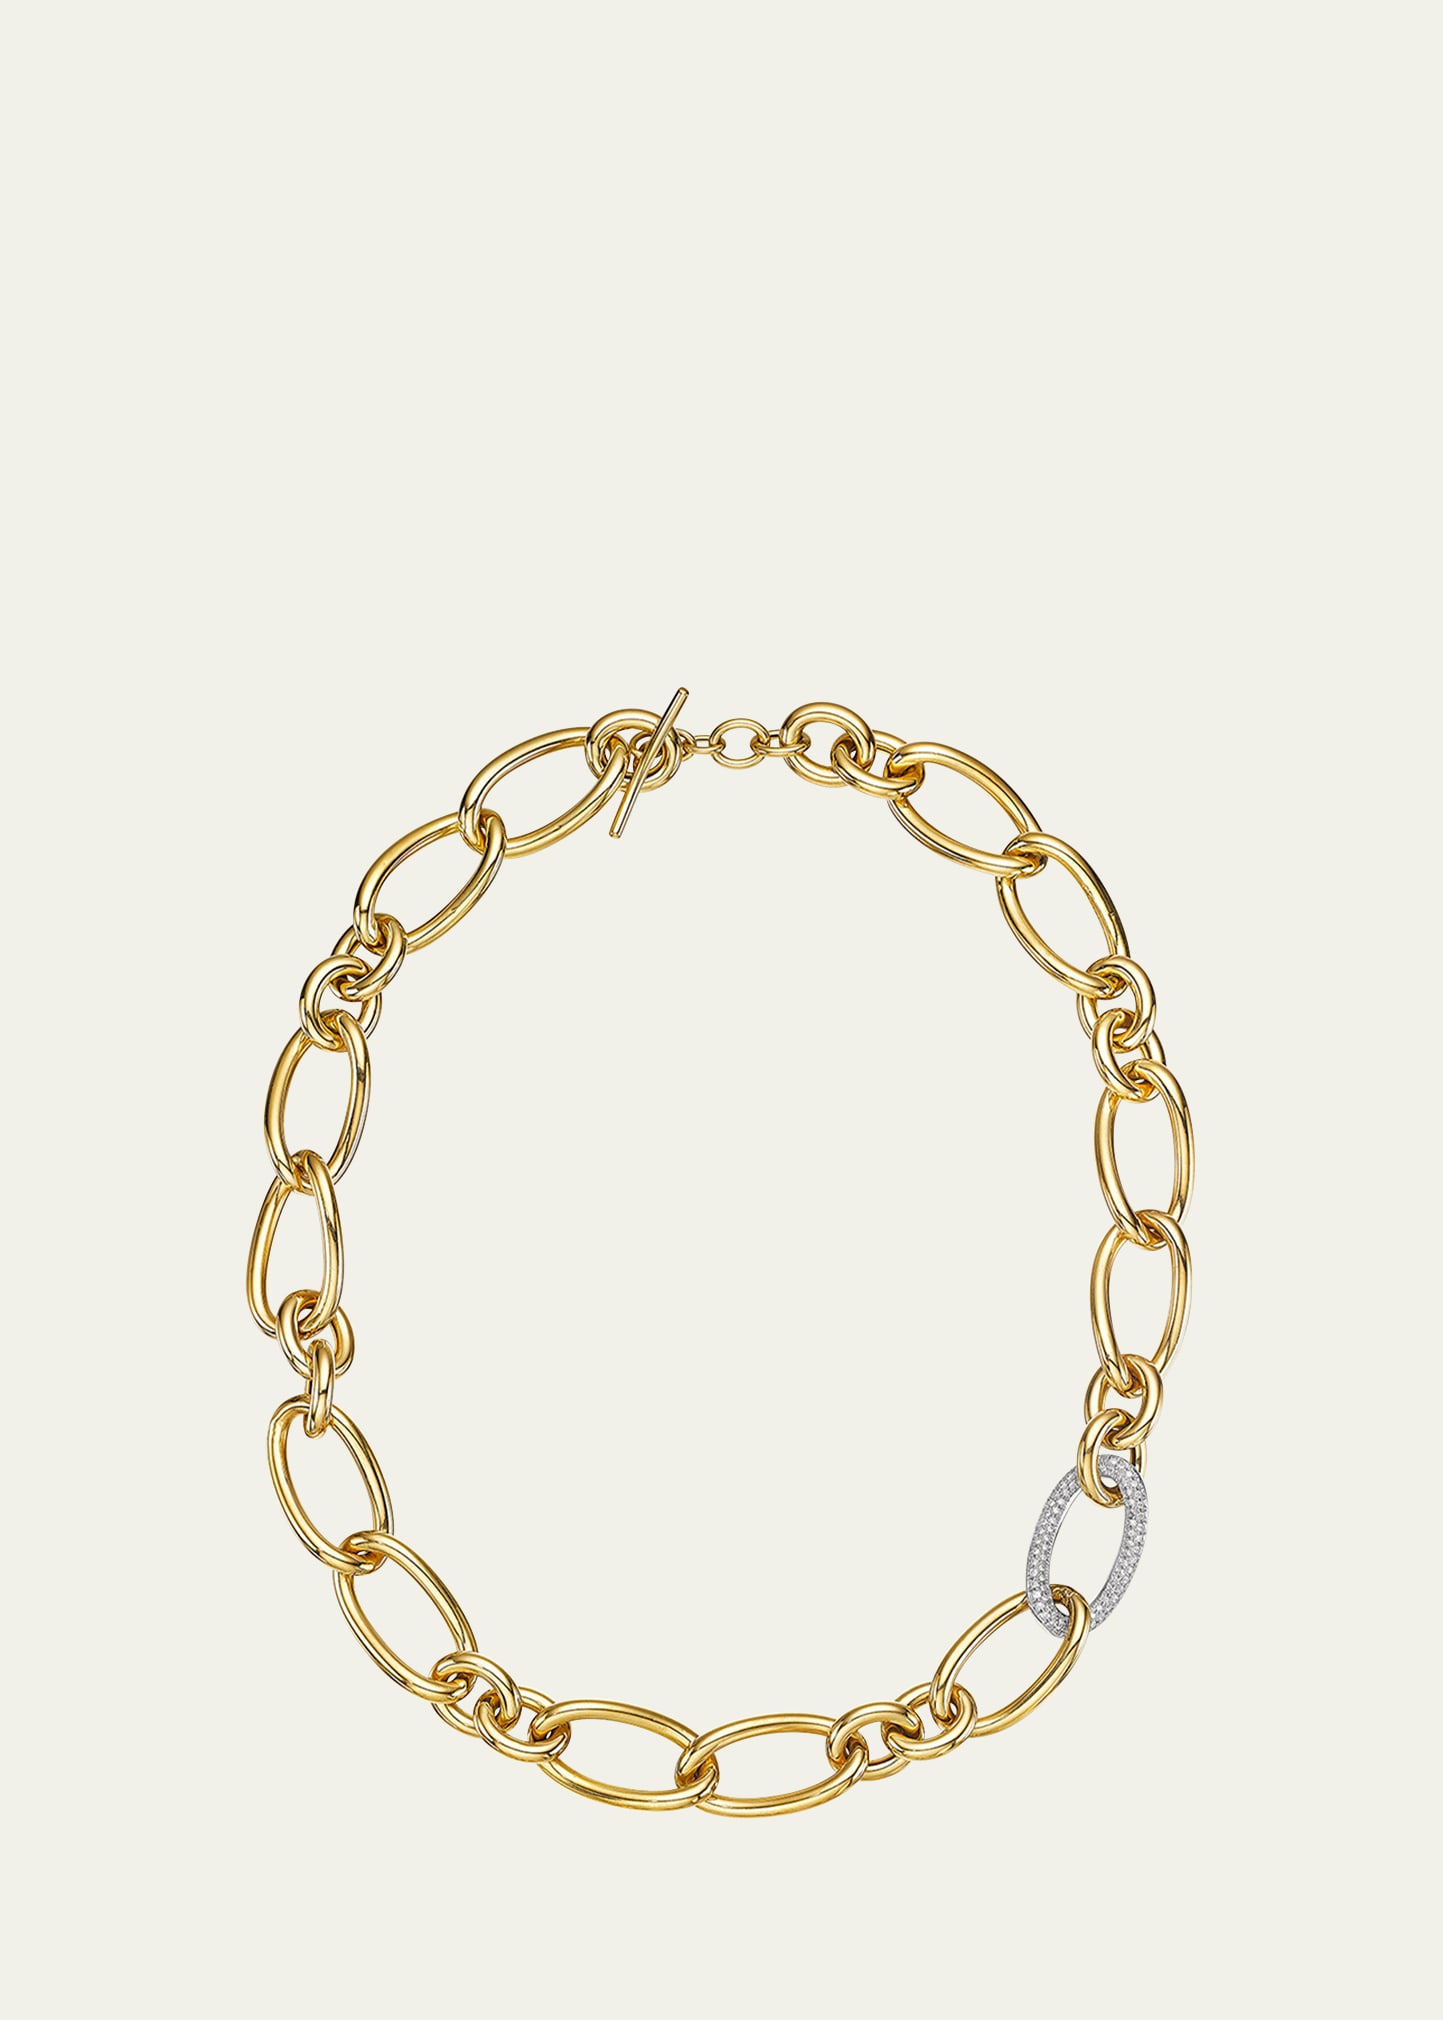 Faraone Mennella 18K Yellow Gold Contessa Link Necklace with One White Gold and White Diamond Link